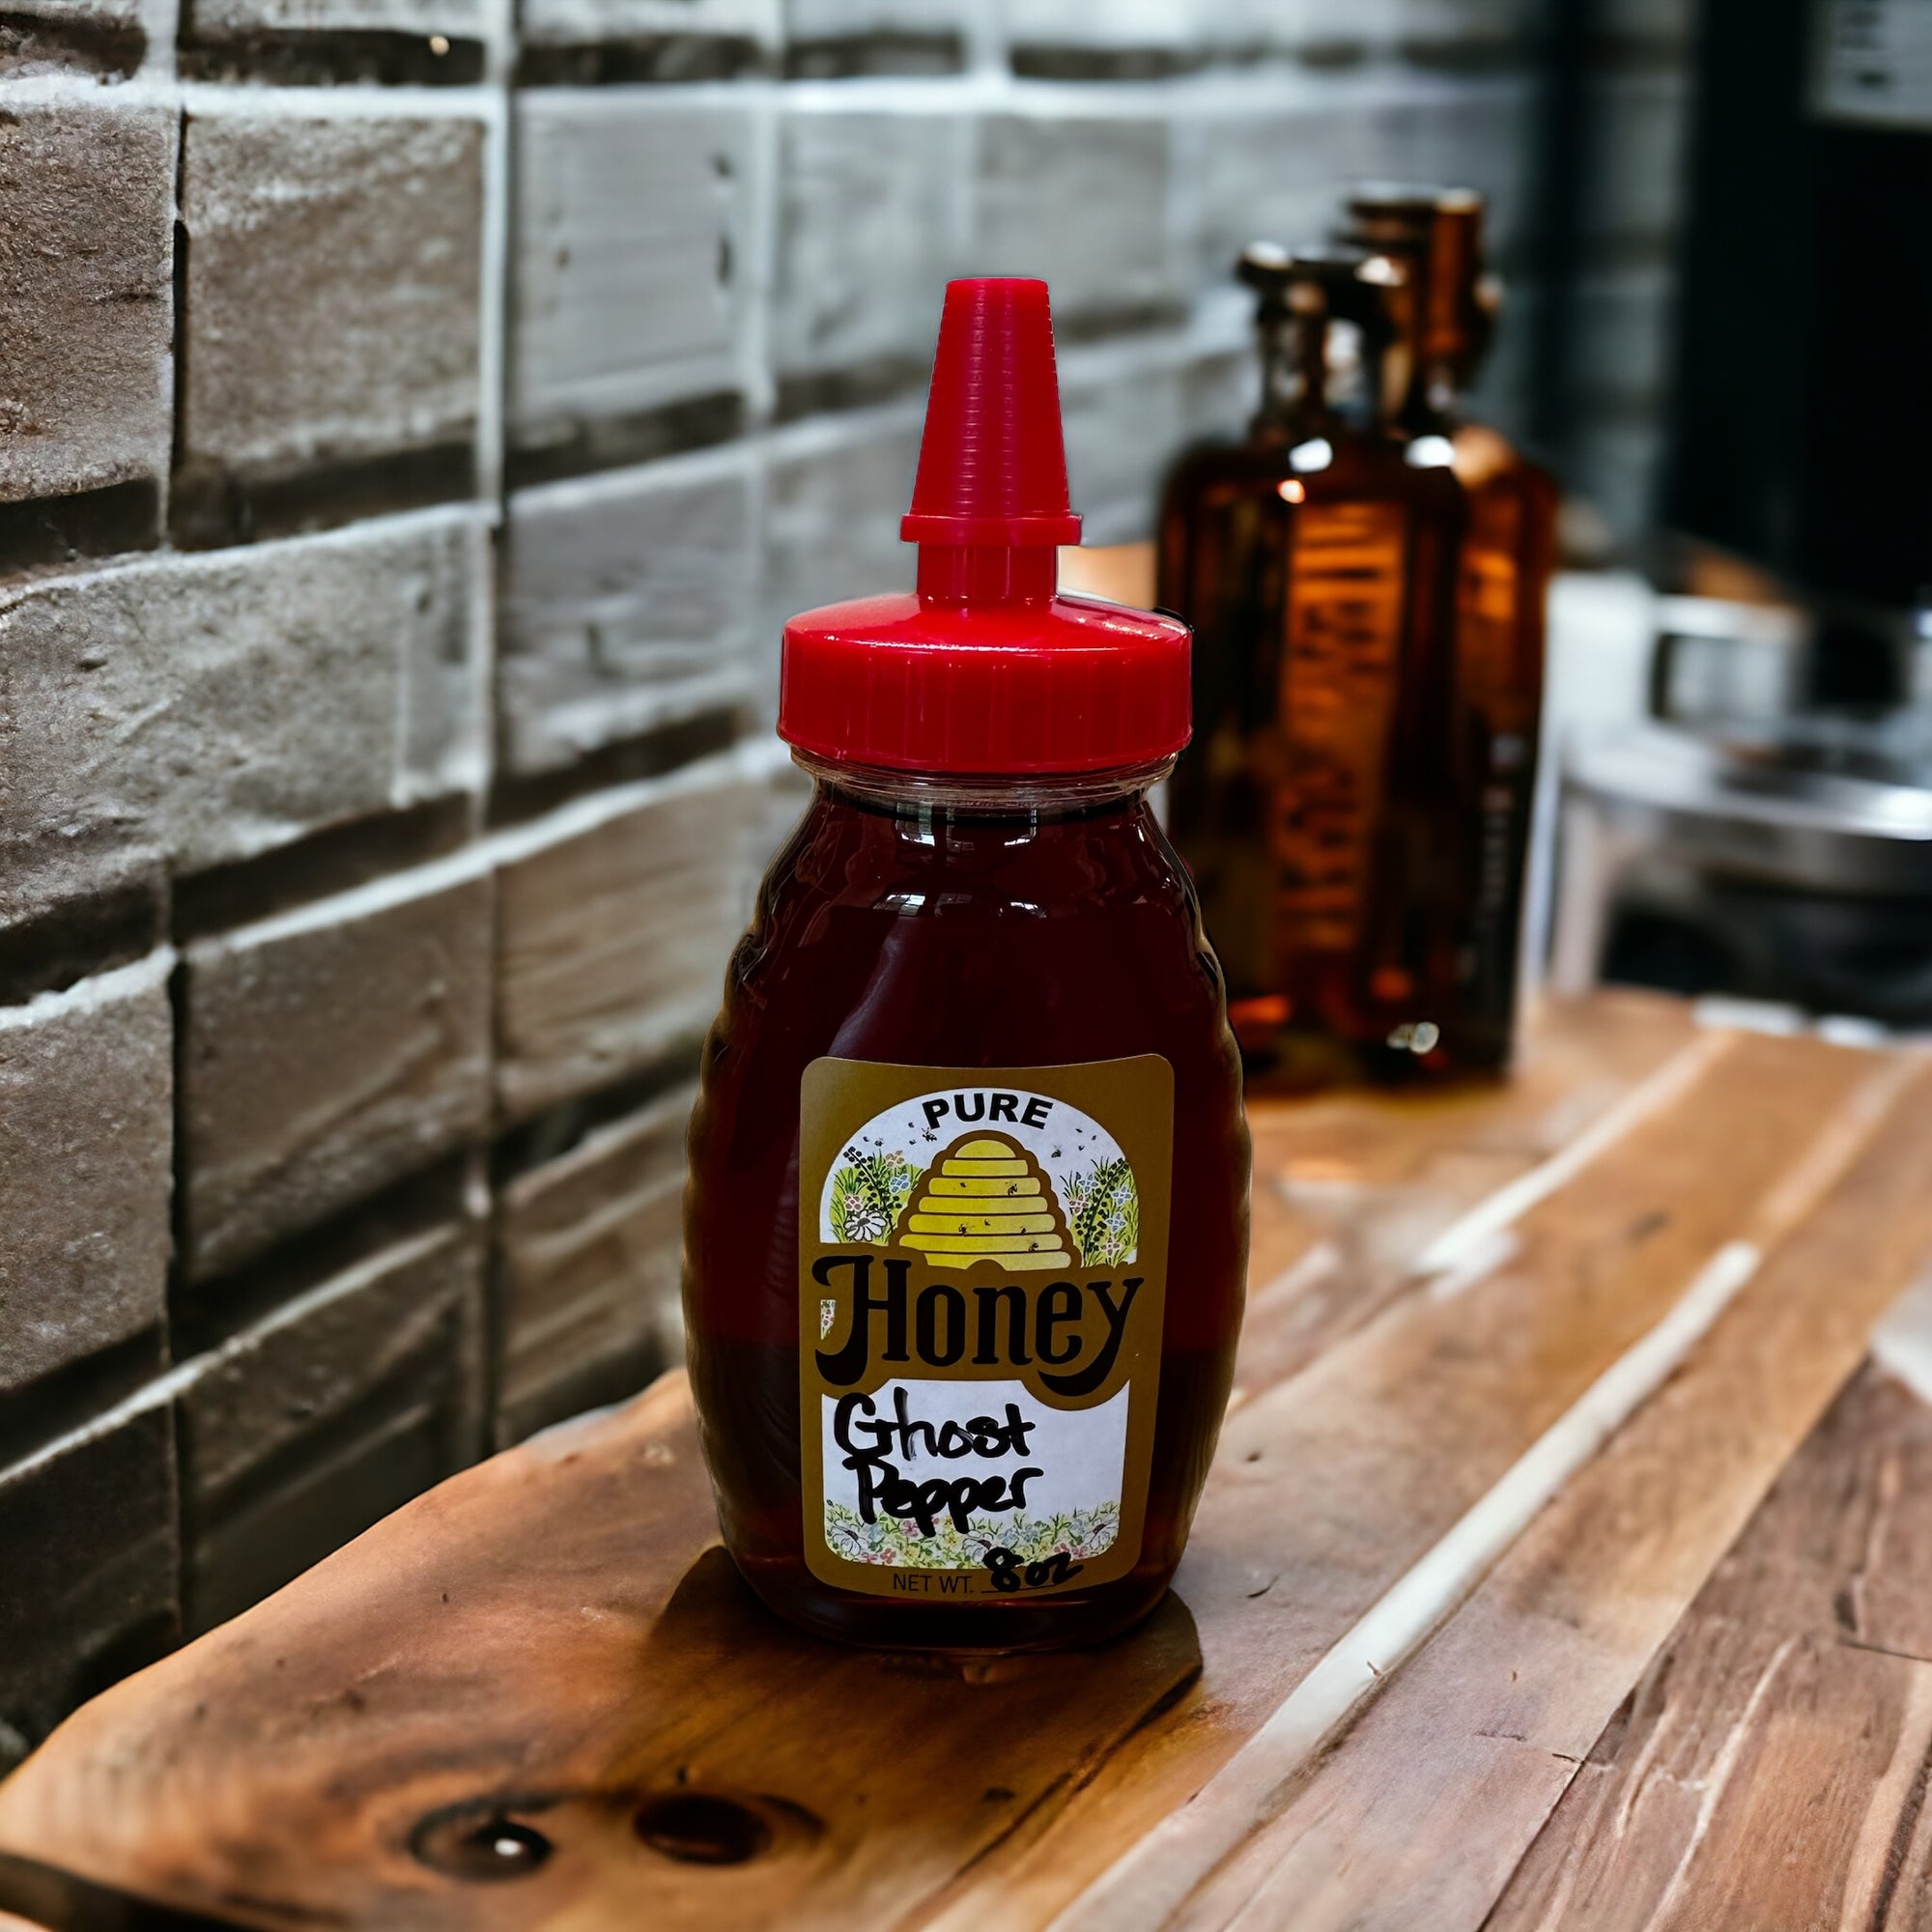 Bottle of ghost pepper honey on a wooden table